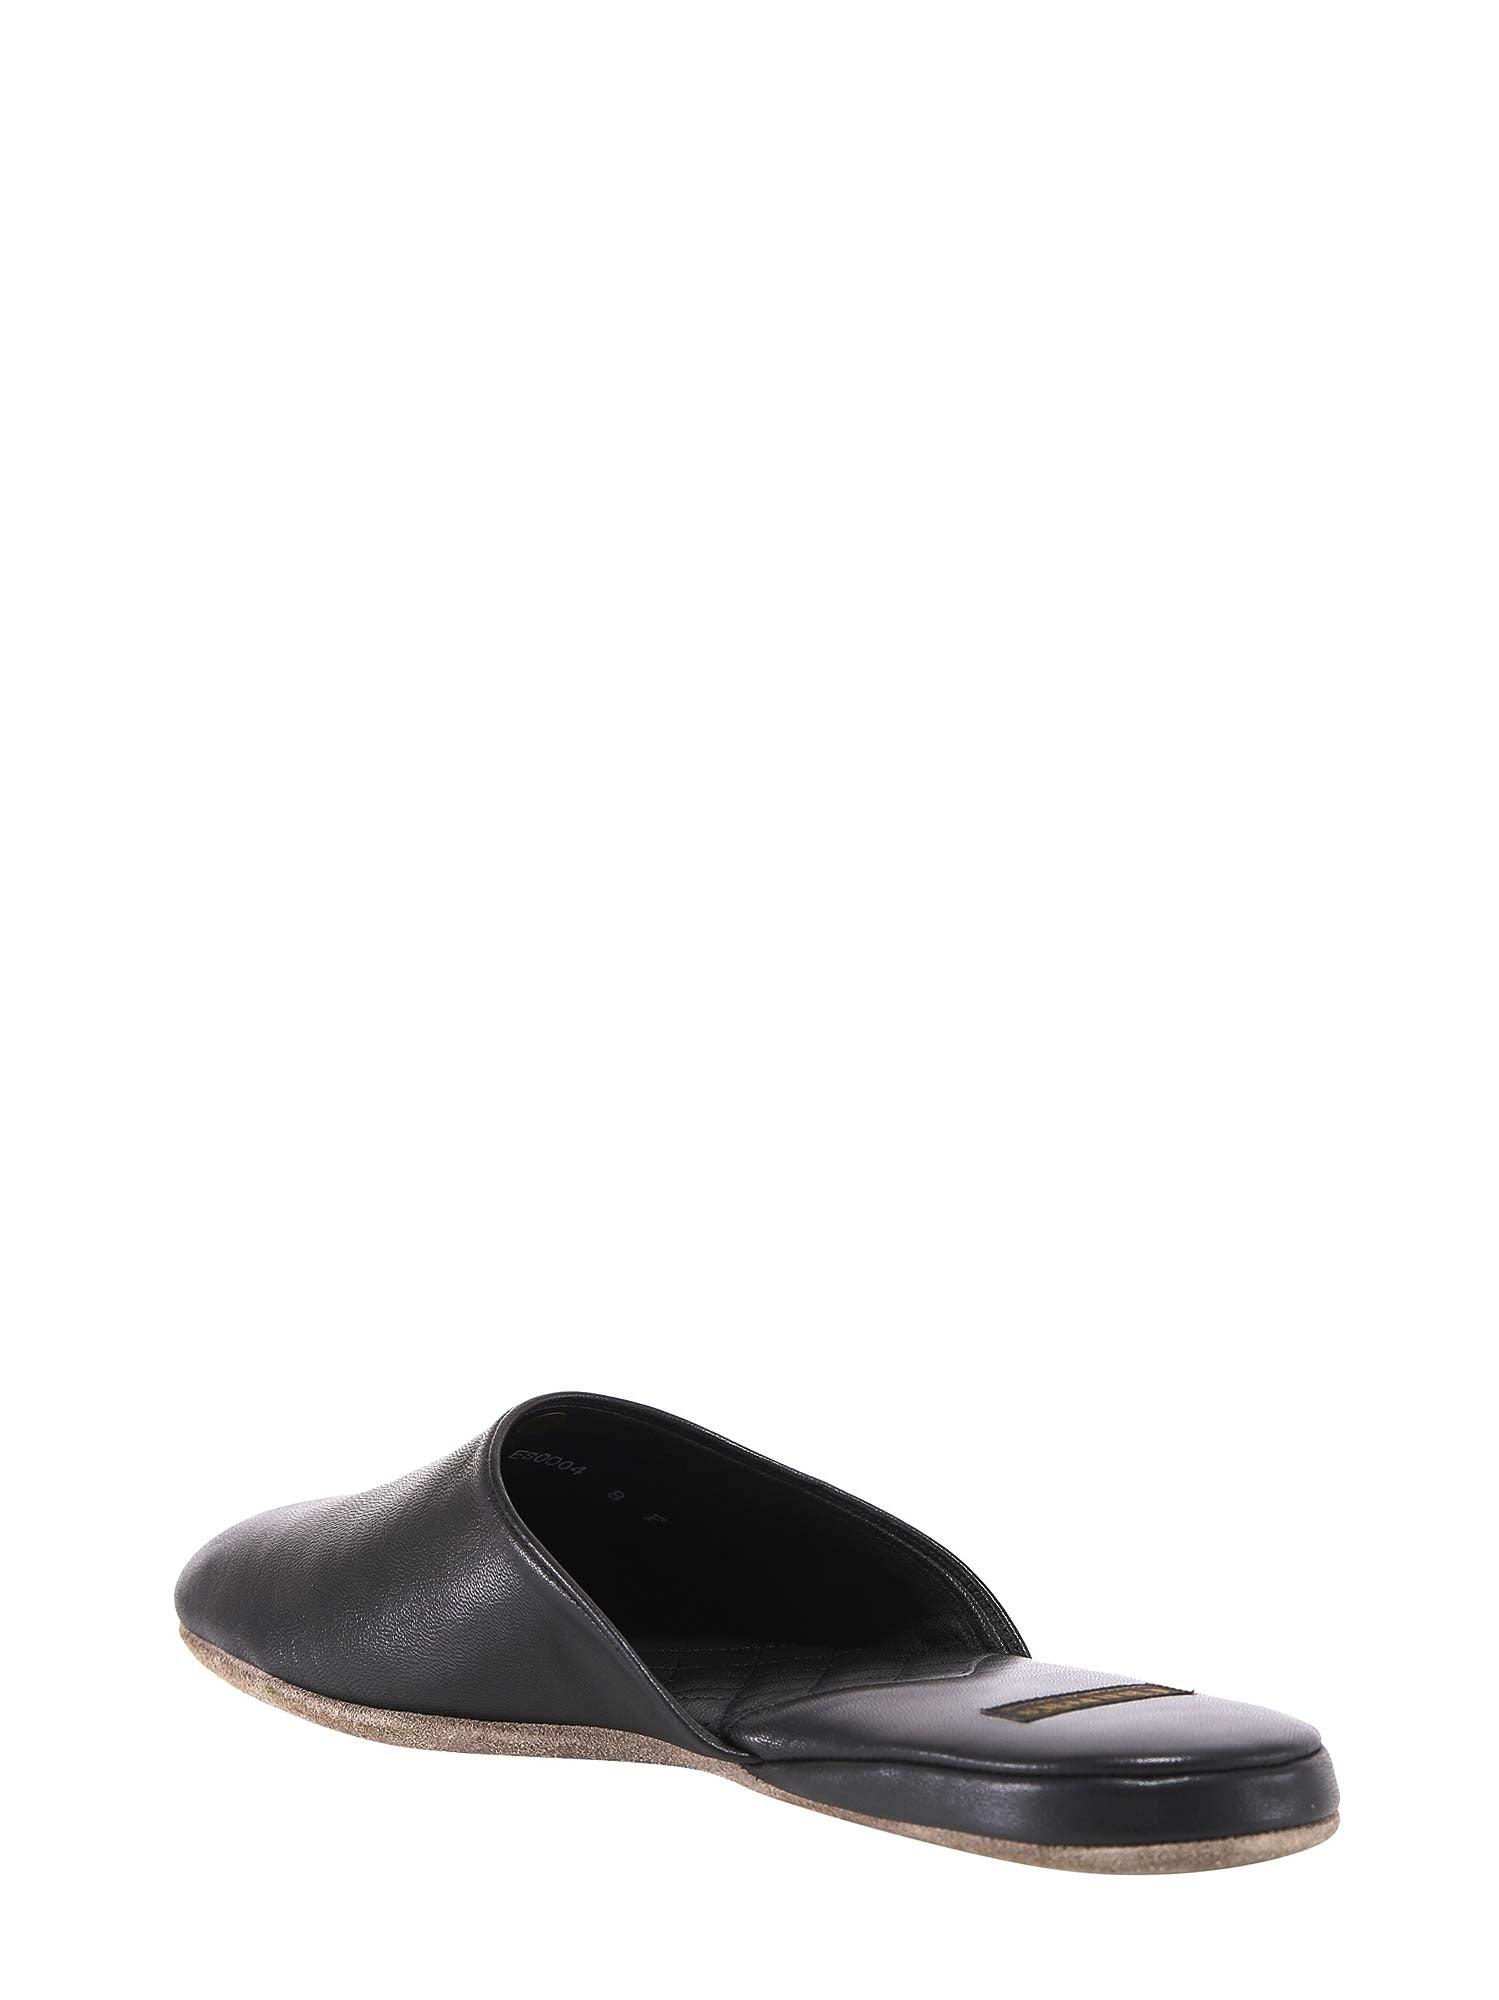 Church's Leather Air Travel Slippers in Black for Men - Lyst